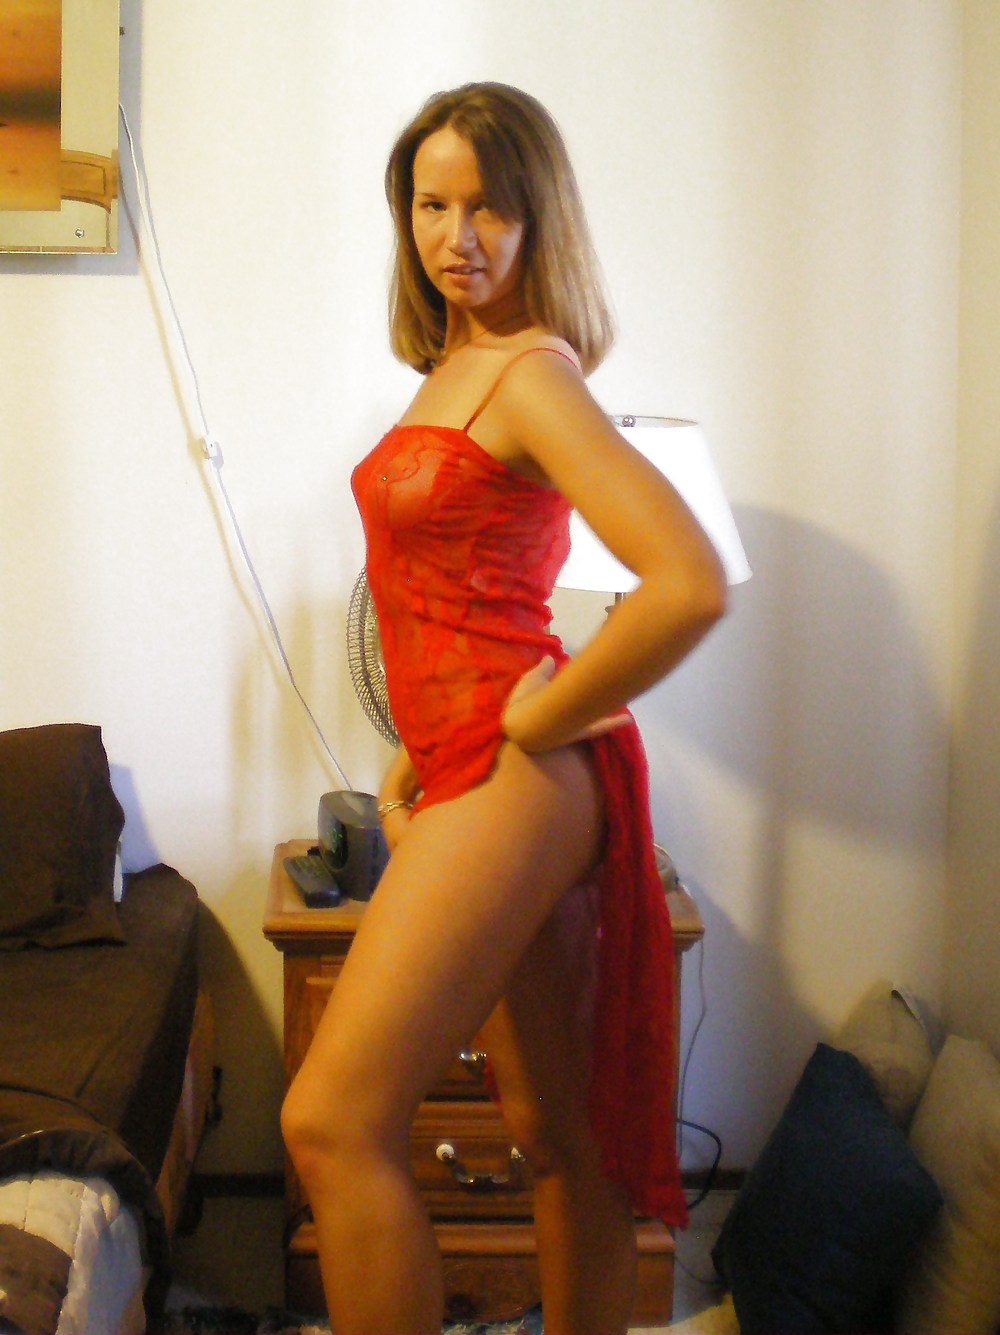 Me in some lingerie and dresses #4509938